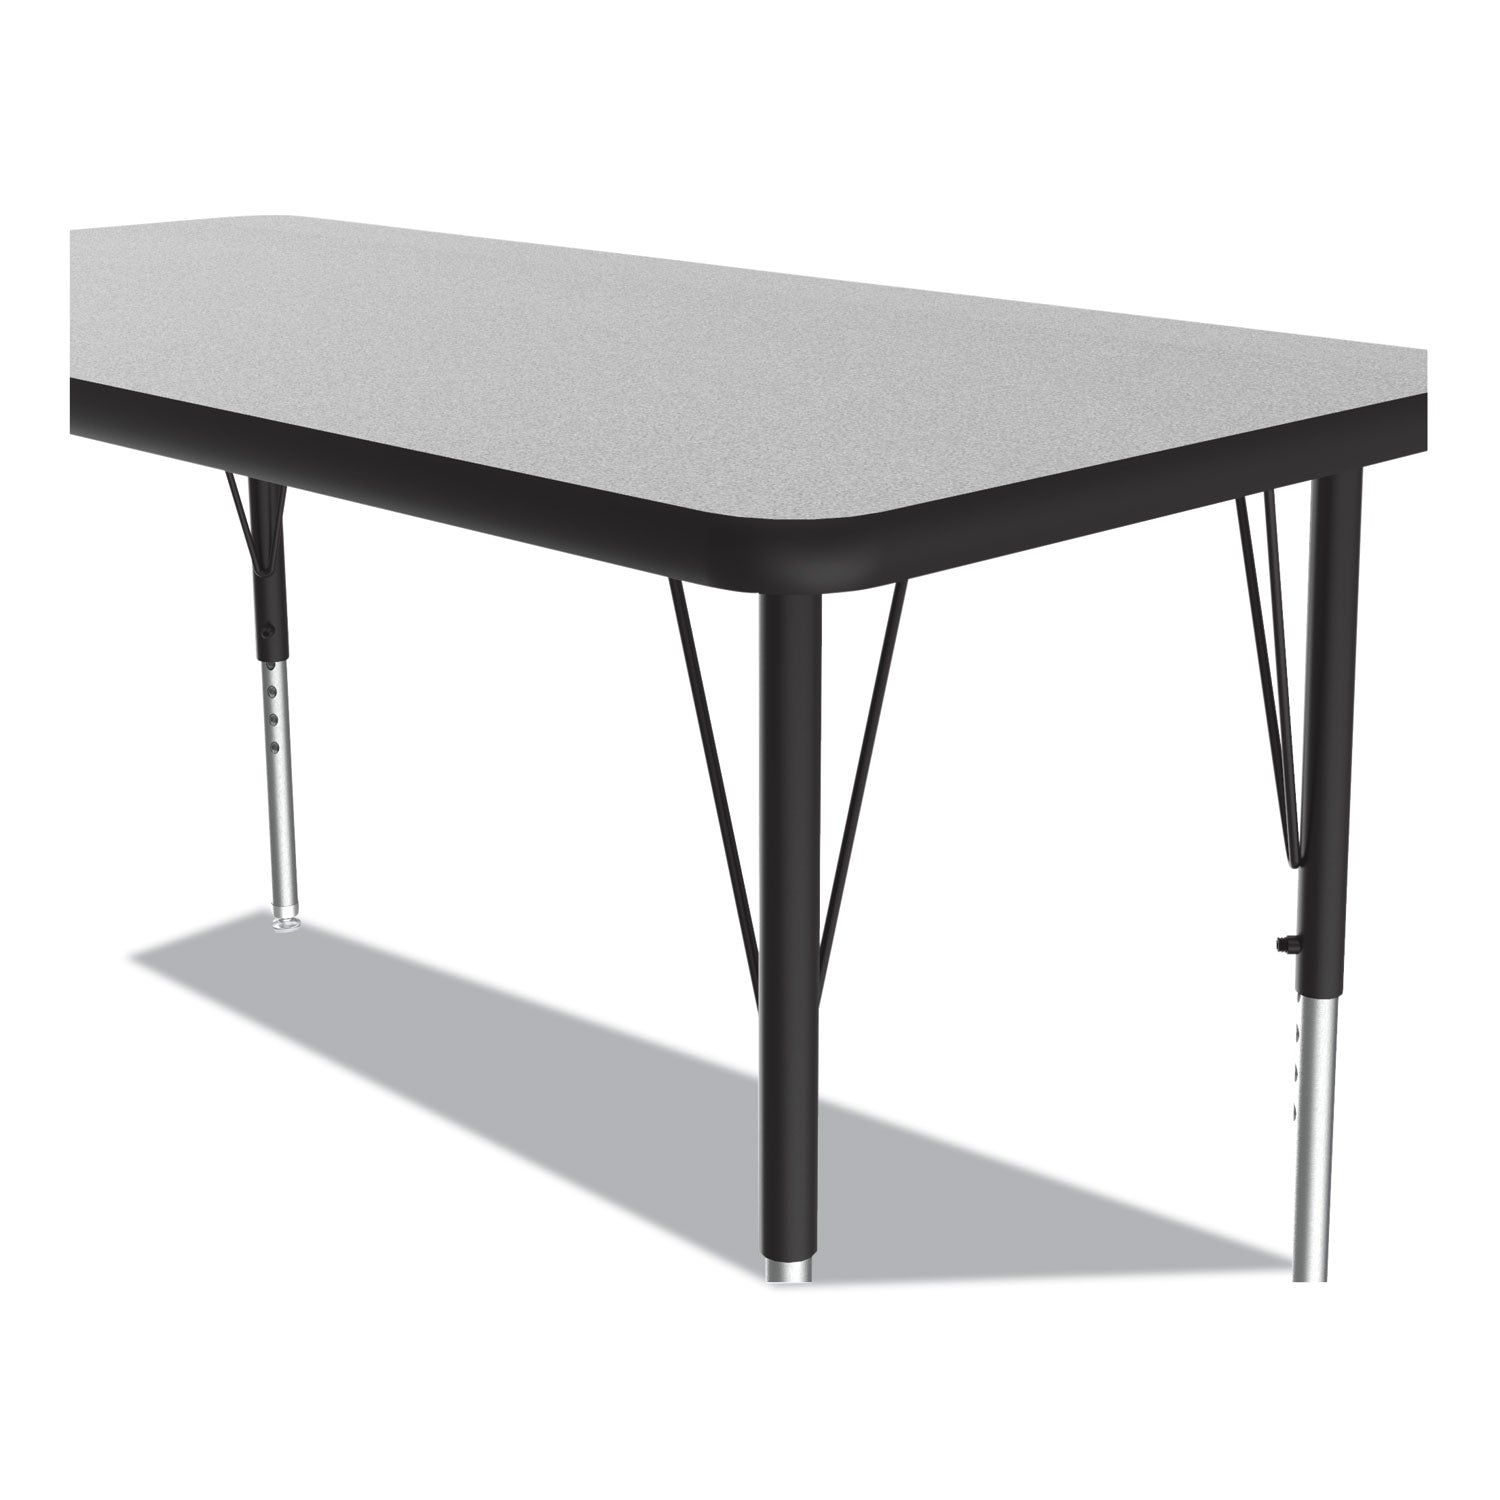 adjustable-activity-table-rectangular-48-x-24-x-19-to-29-granite-top-black-legs-4-pallet-ships-in-4-6-business-days_crl2448tf1595k4 - 6